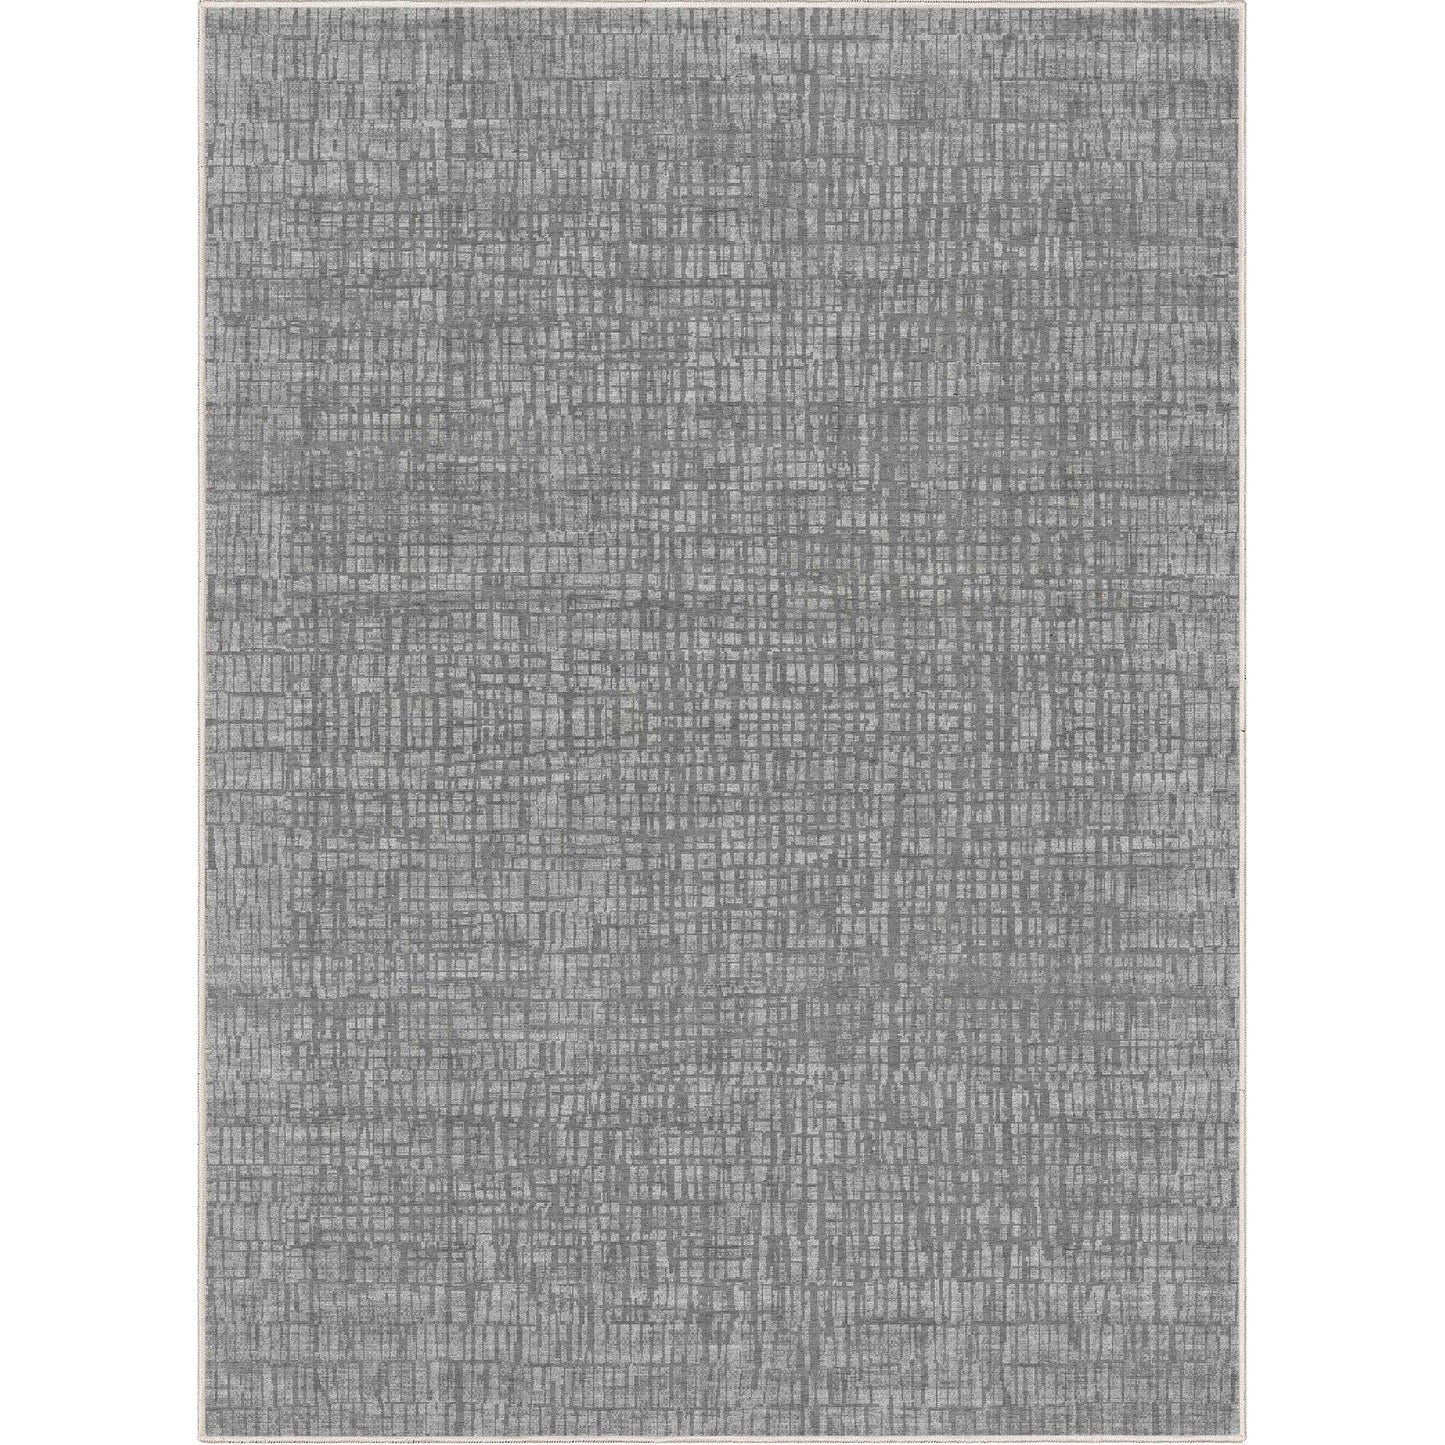 Abstract Nightscape Gray Rug W-AB-39E